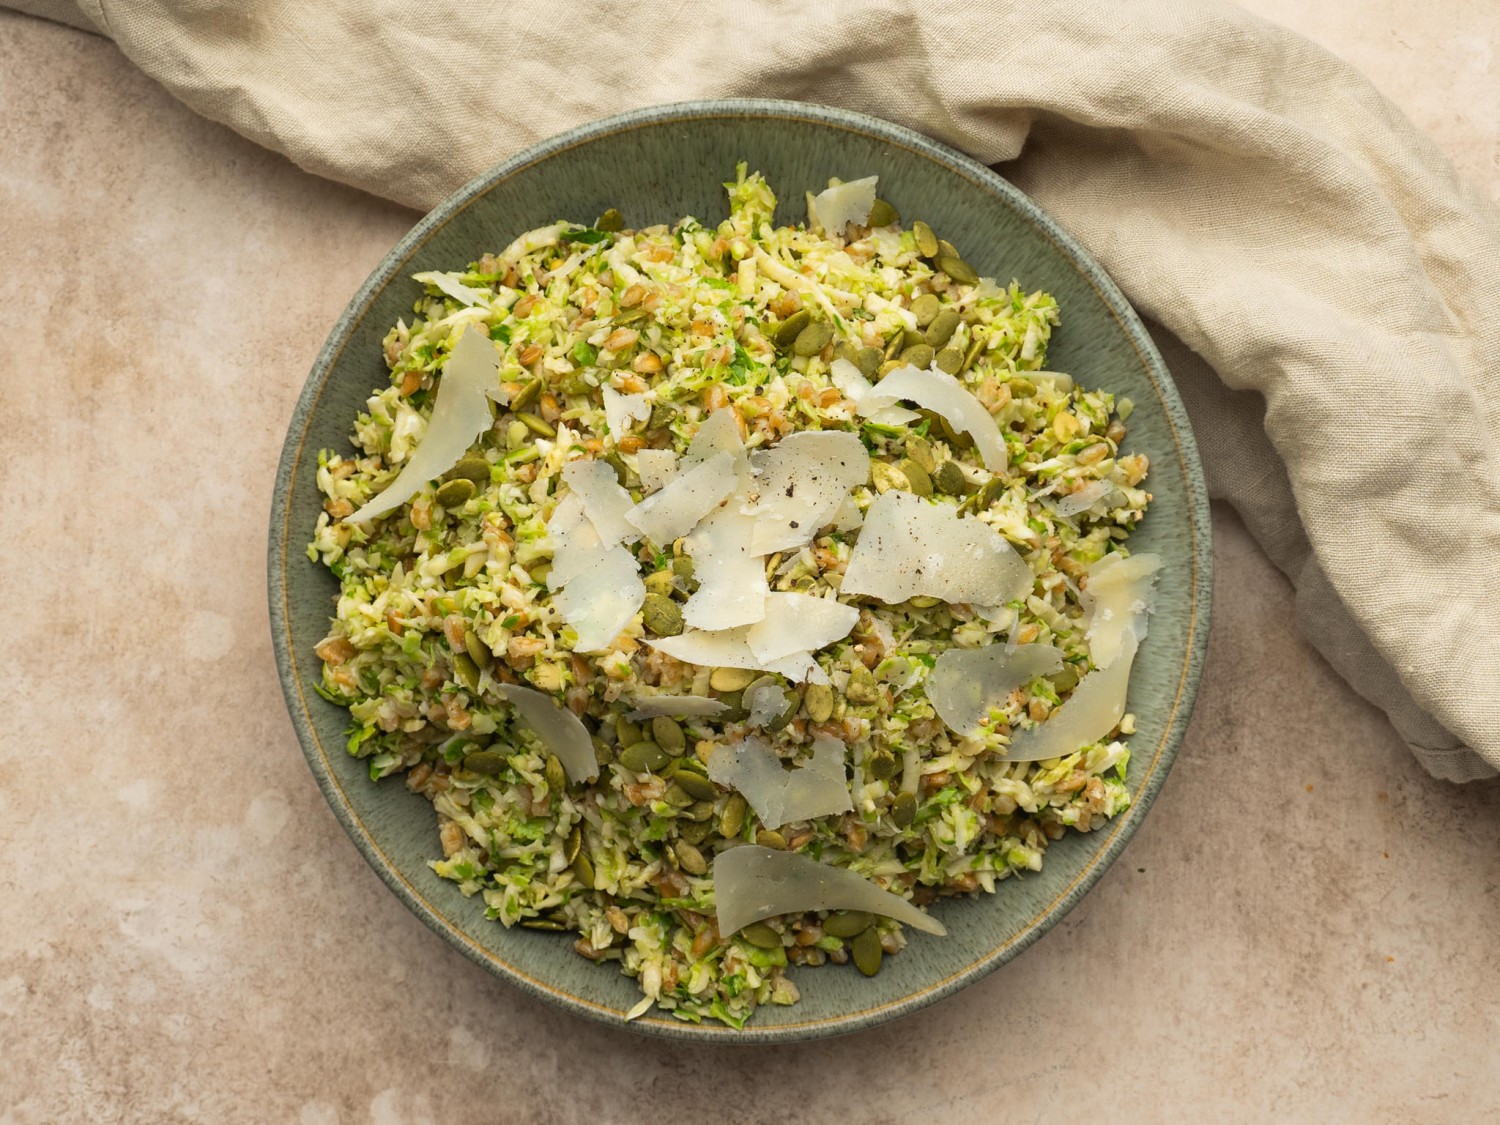 Brussel sprout salad recipe served with shaved parmesan cheese